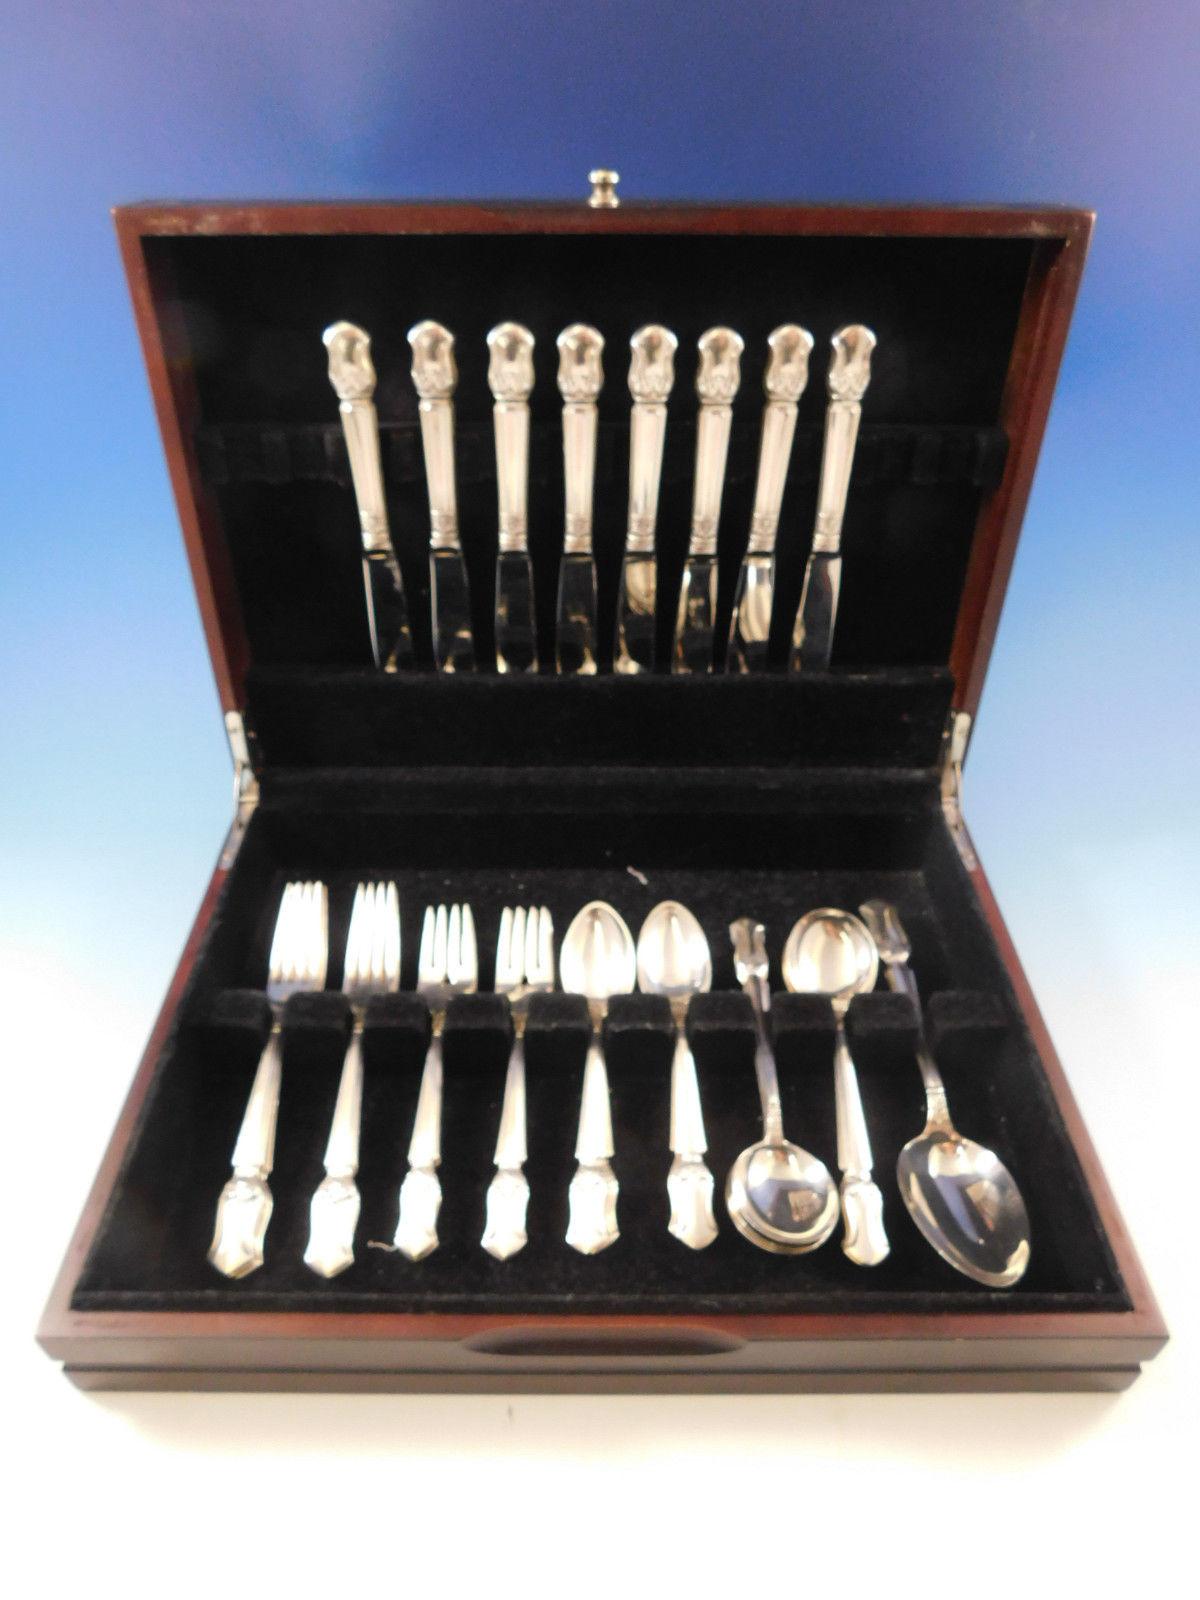 Scandinavian style Duke of Windsor by Manchester sterling silver flatware set, 41 pieces. This set includes:

8 knives, 8 3/4